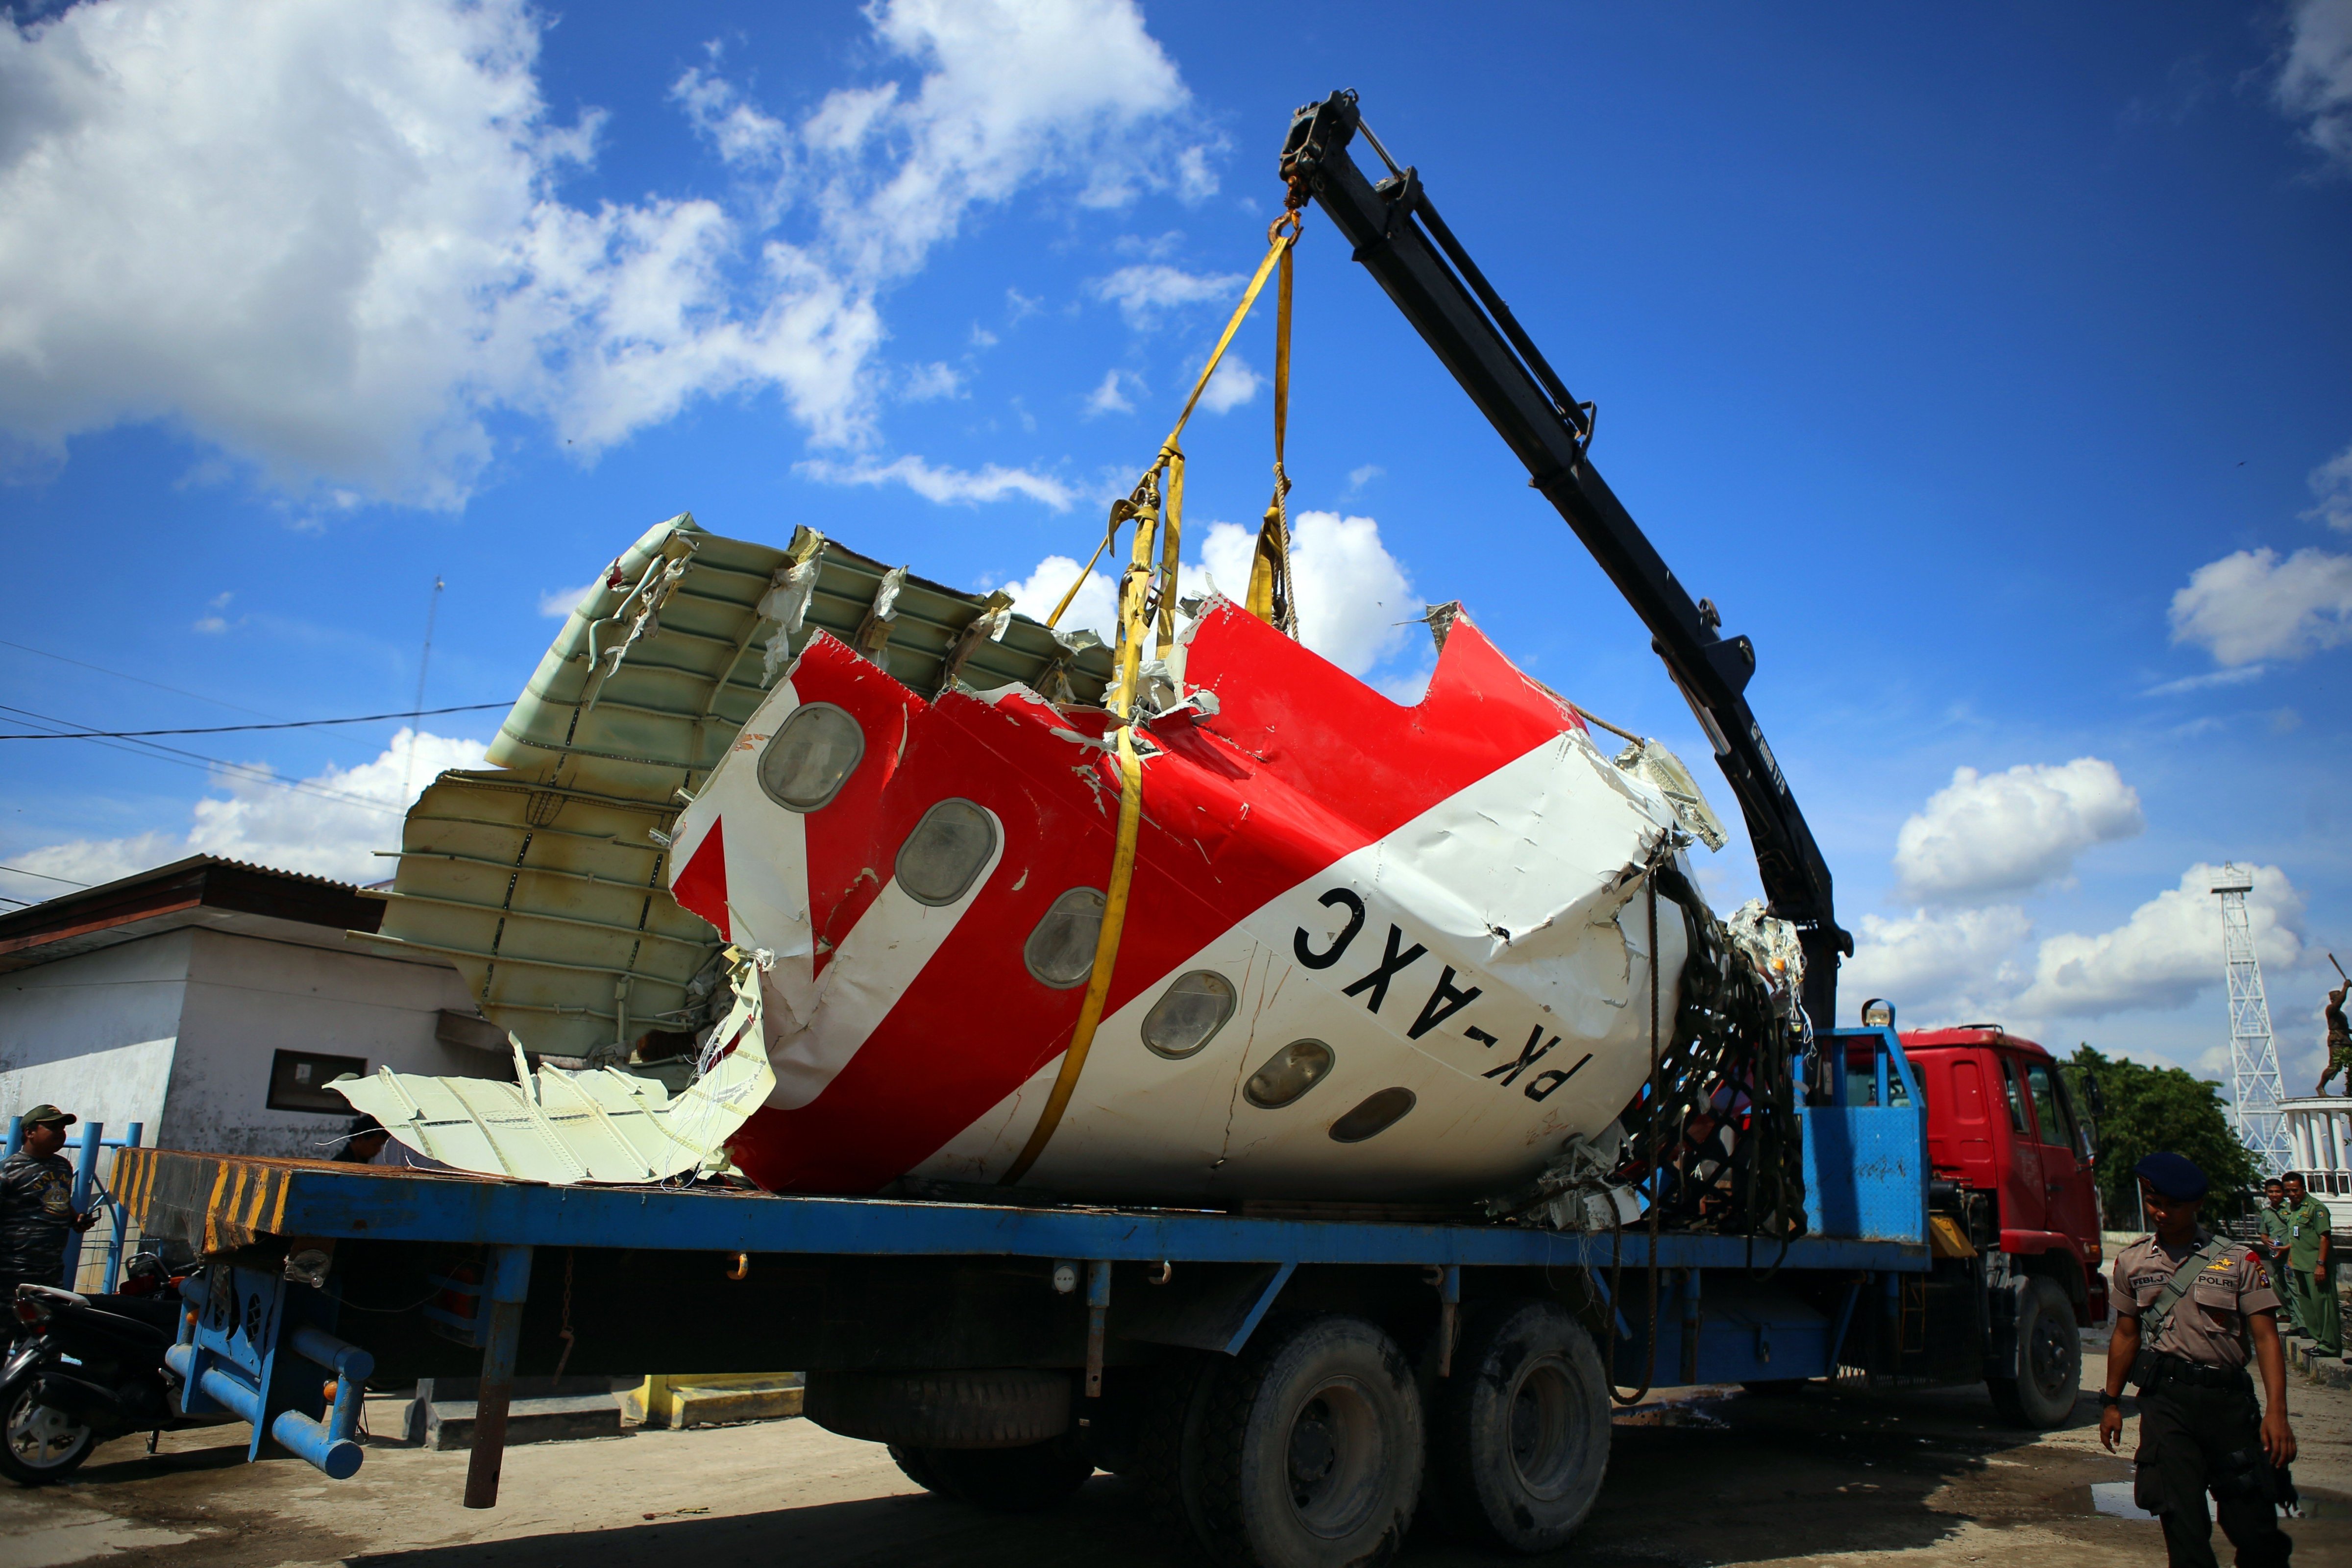 AirAsia aircraft tail storage is recovered